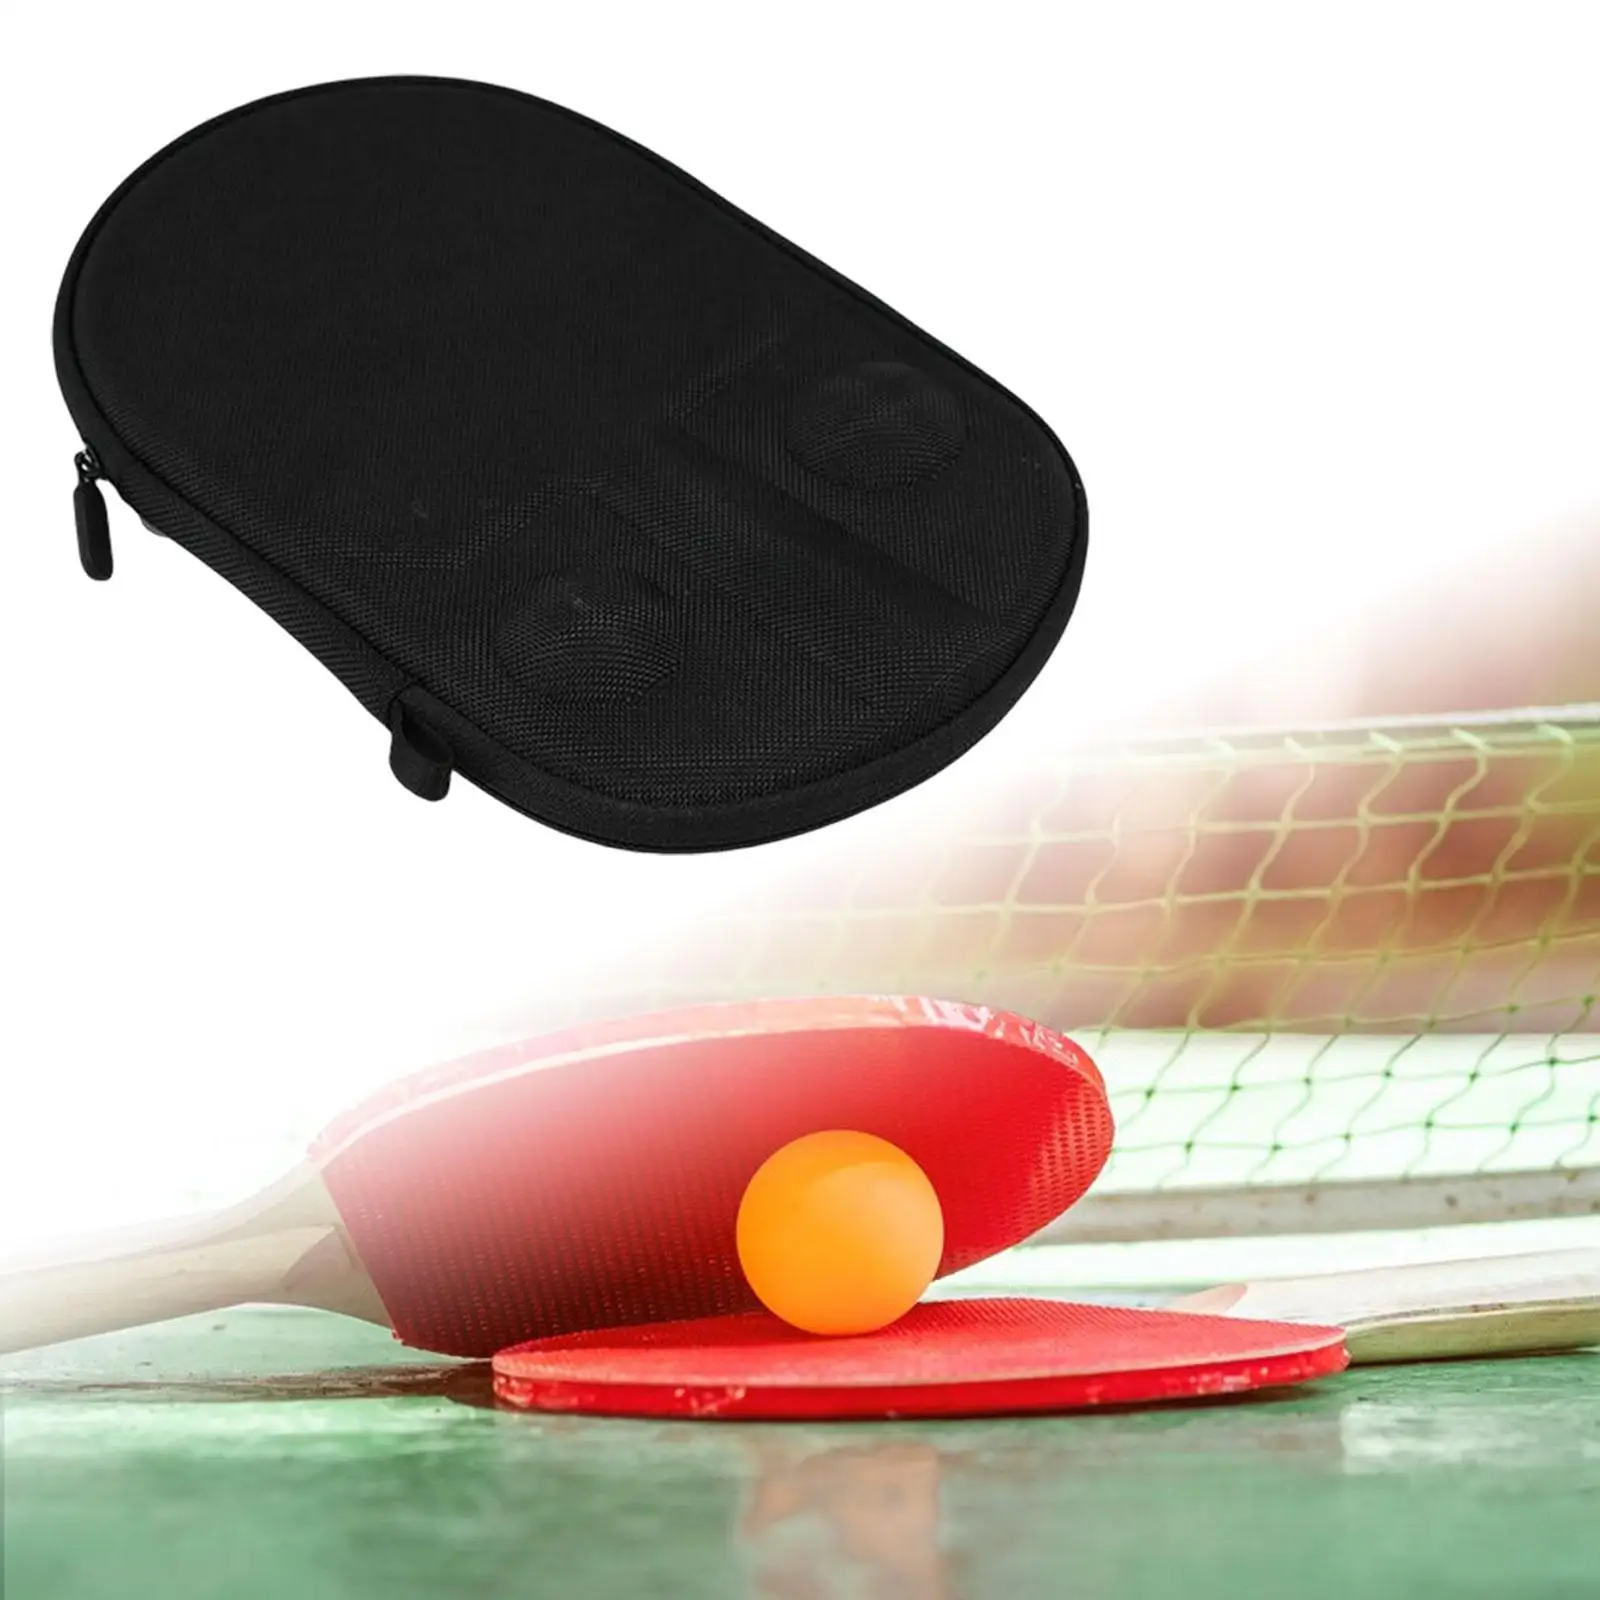 Multifunction Table Tennis Racket Bag Lightweight Reusable with Zipper Wear Resistant for Indoor Outdoor Competition Training